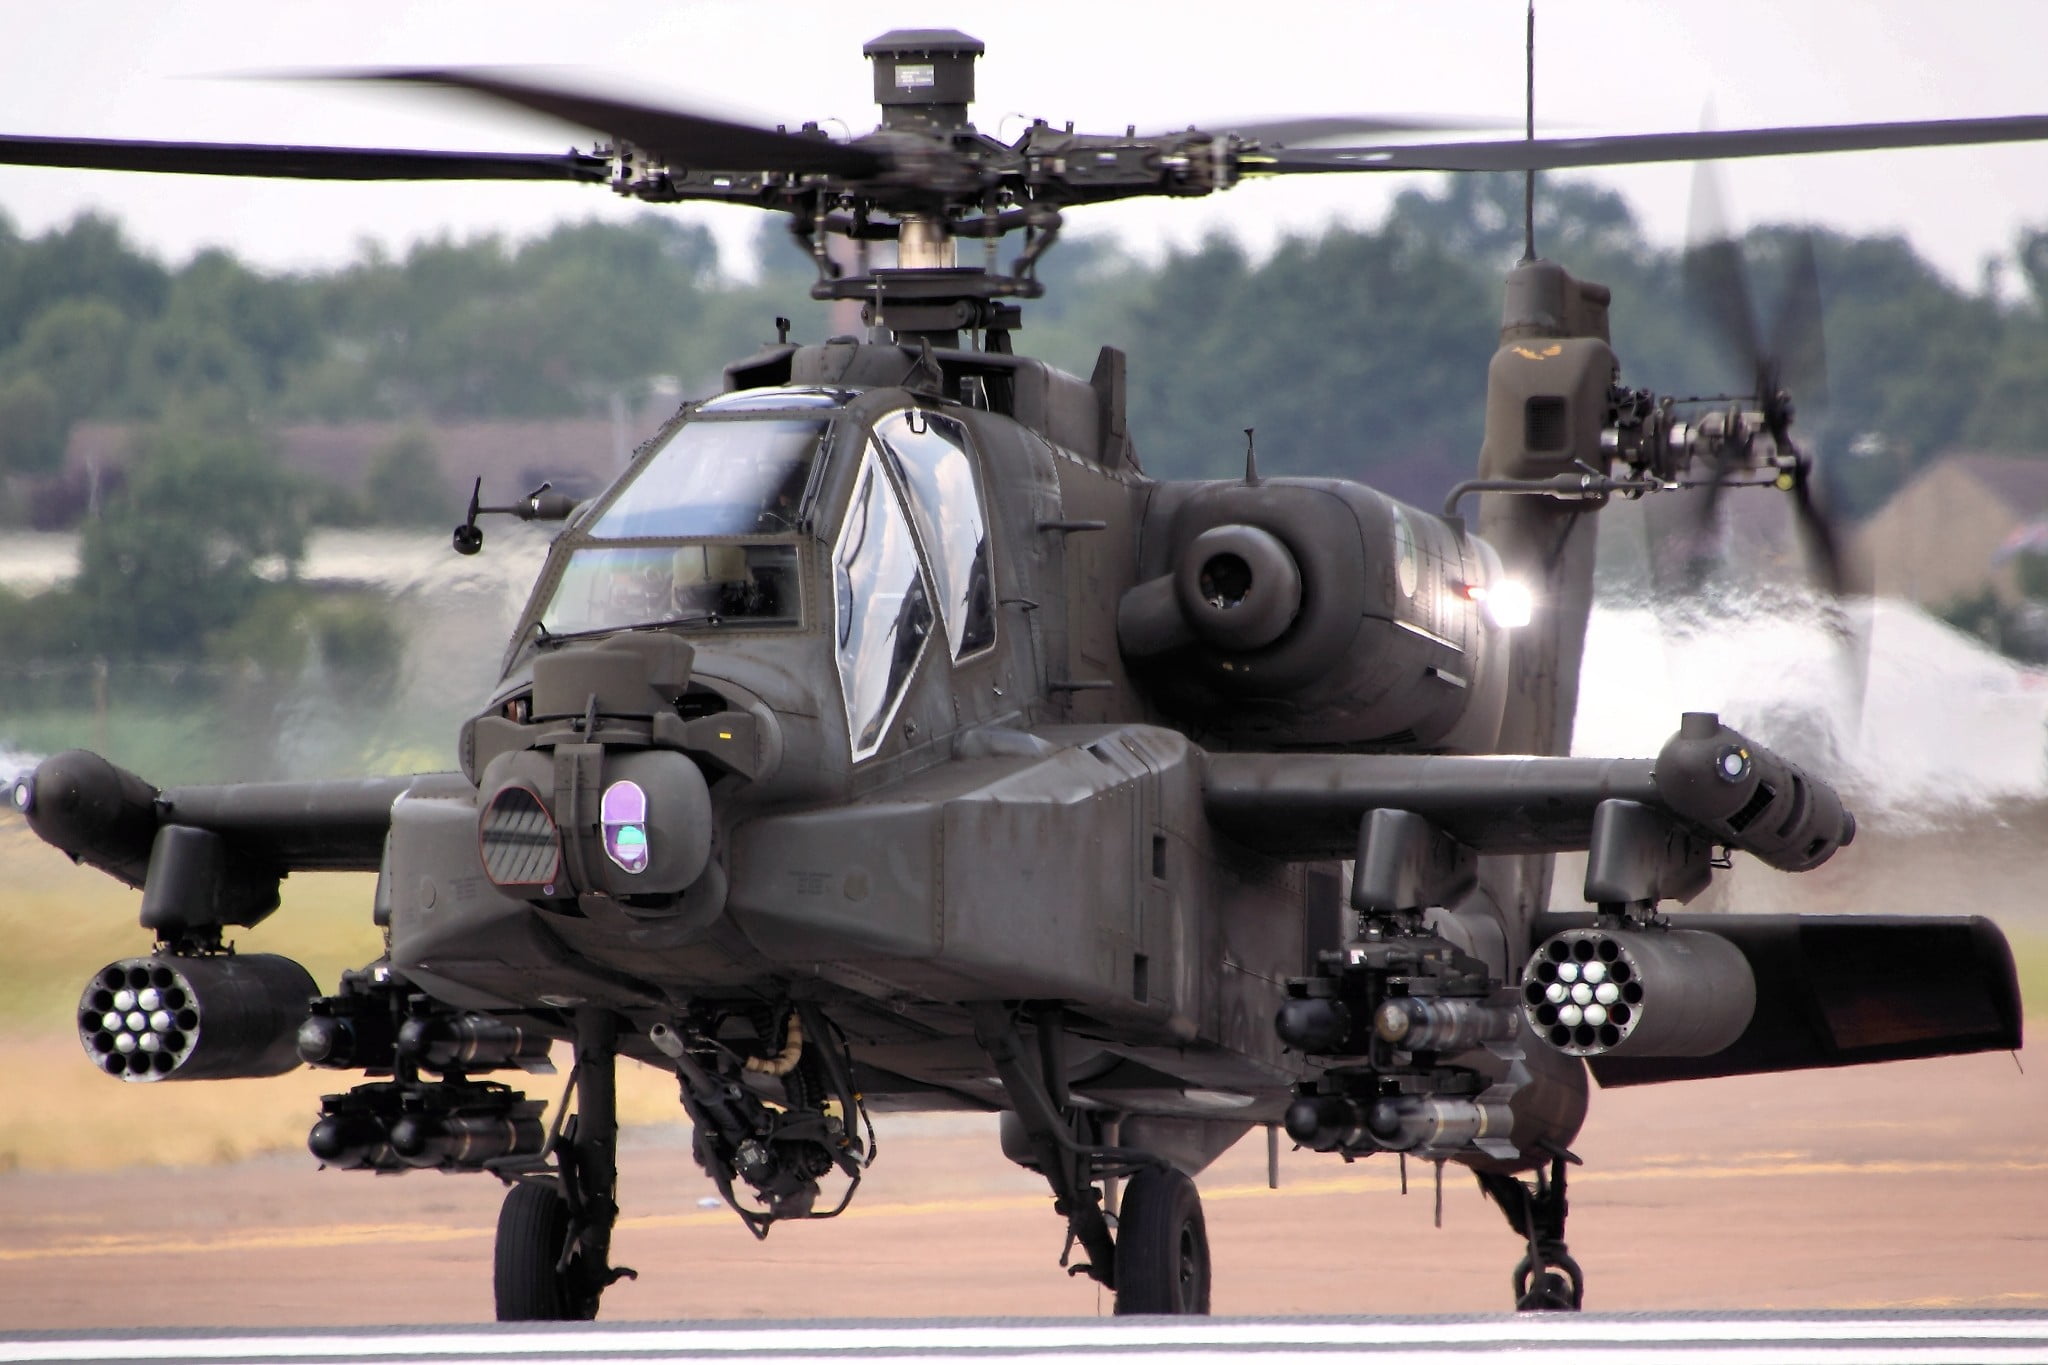 gray helicopter, AH-64 Apache, Fire Birds, military aircraft